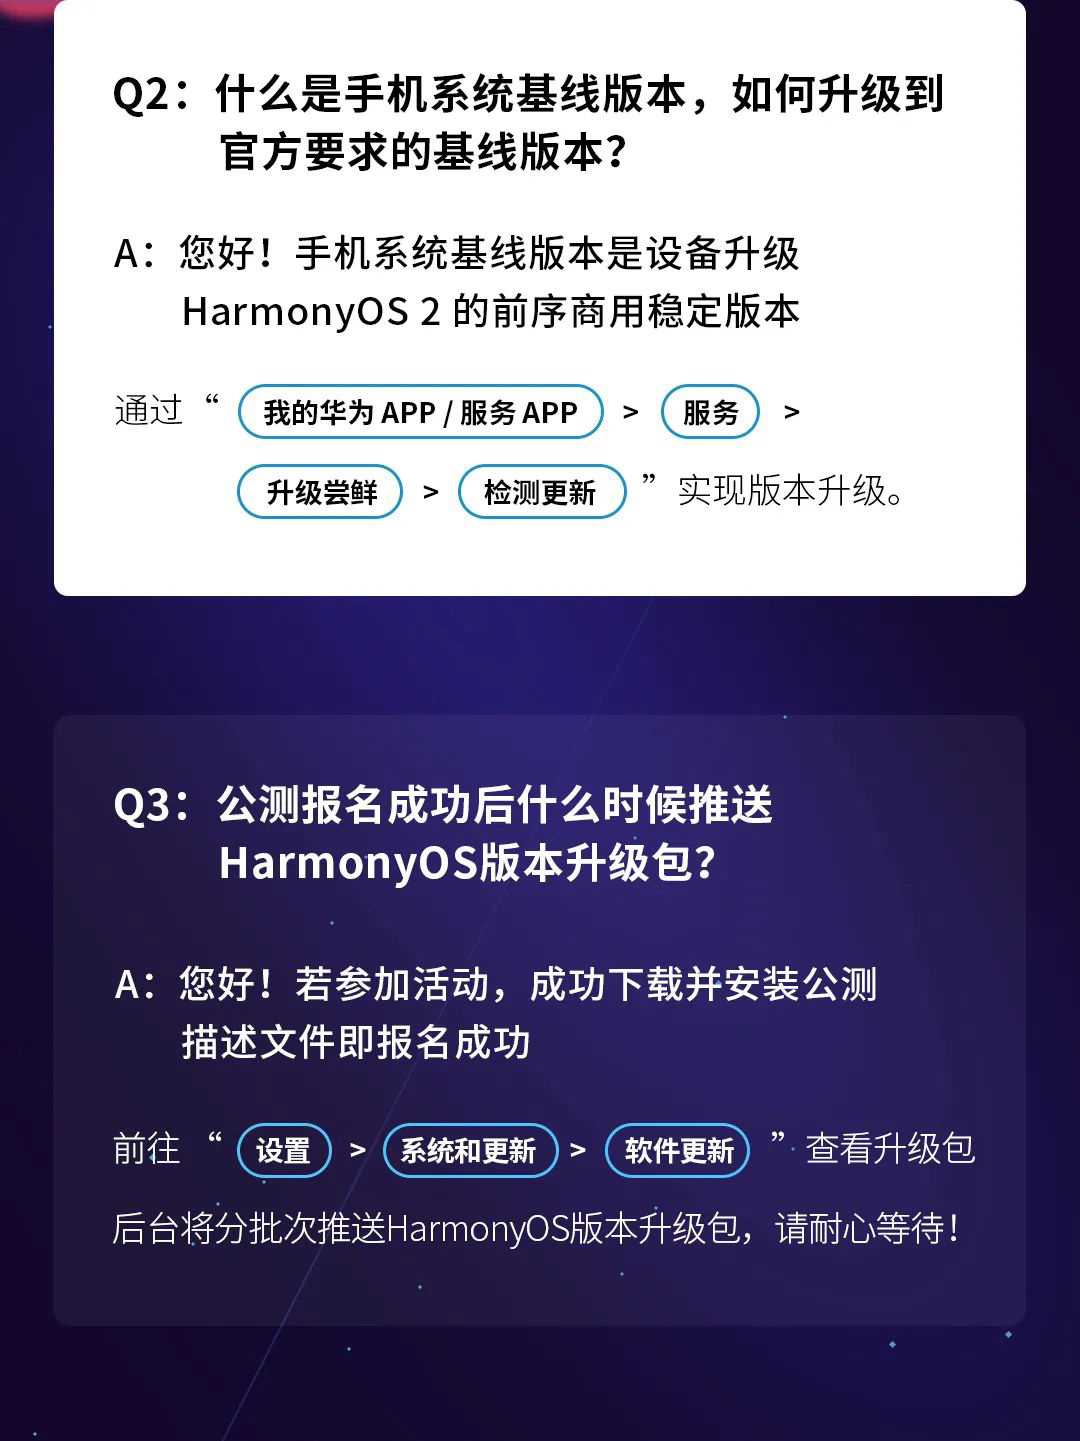 HarmonyOS Question and Answer-2